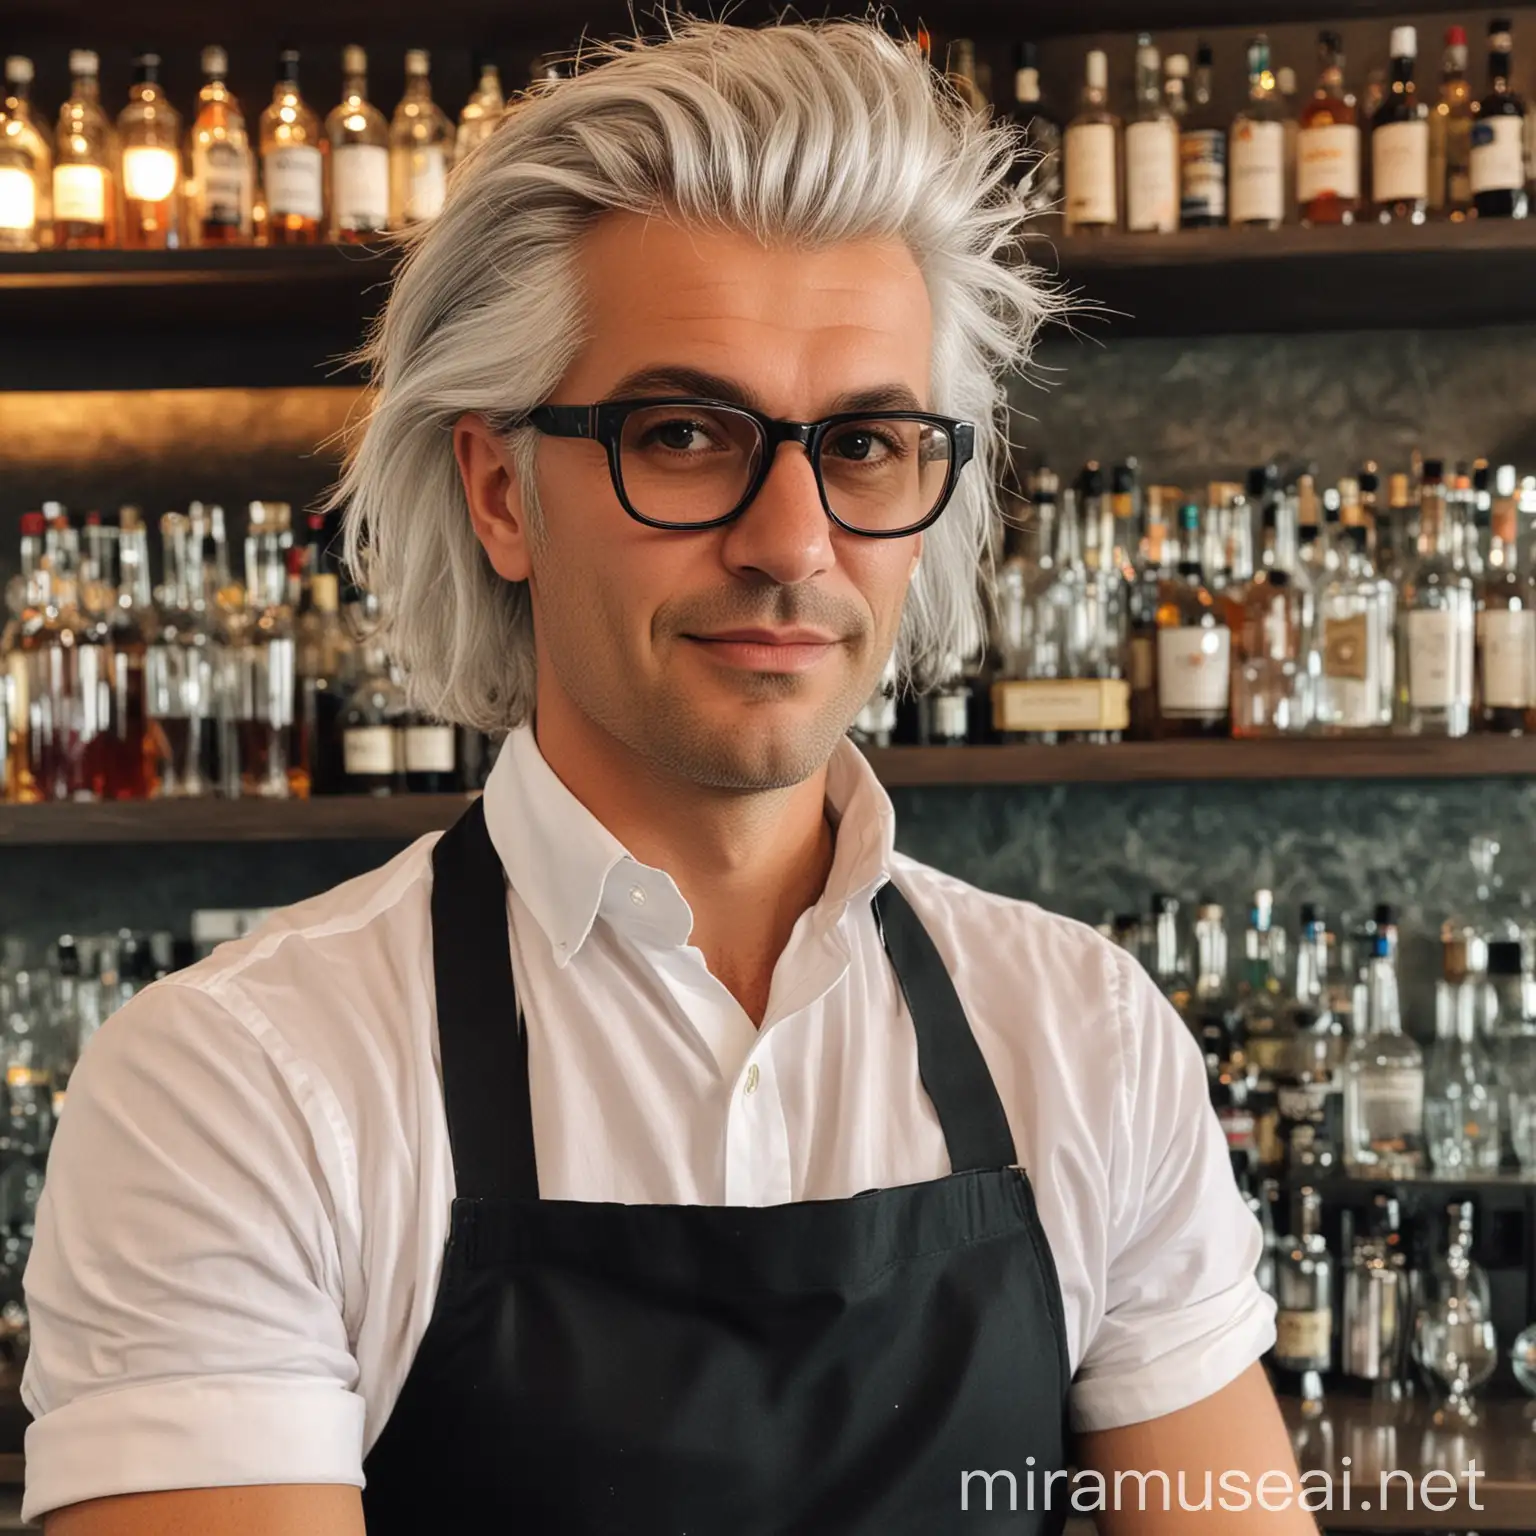 An Austrian bartender with cool glasses and grey hair